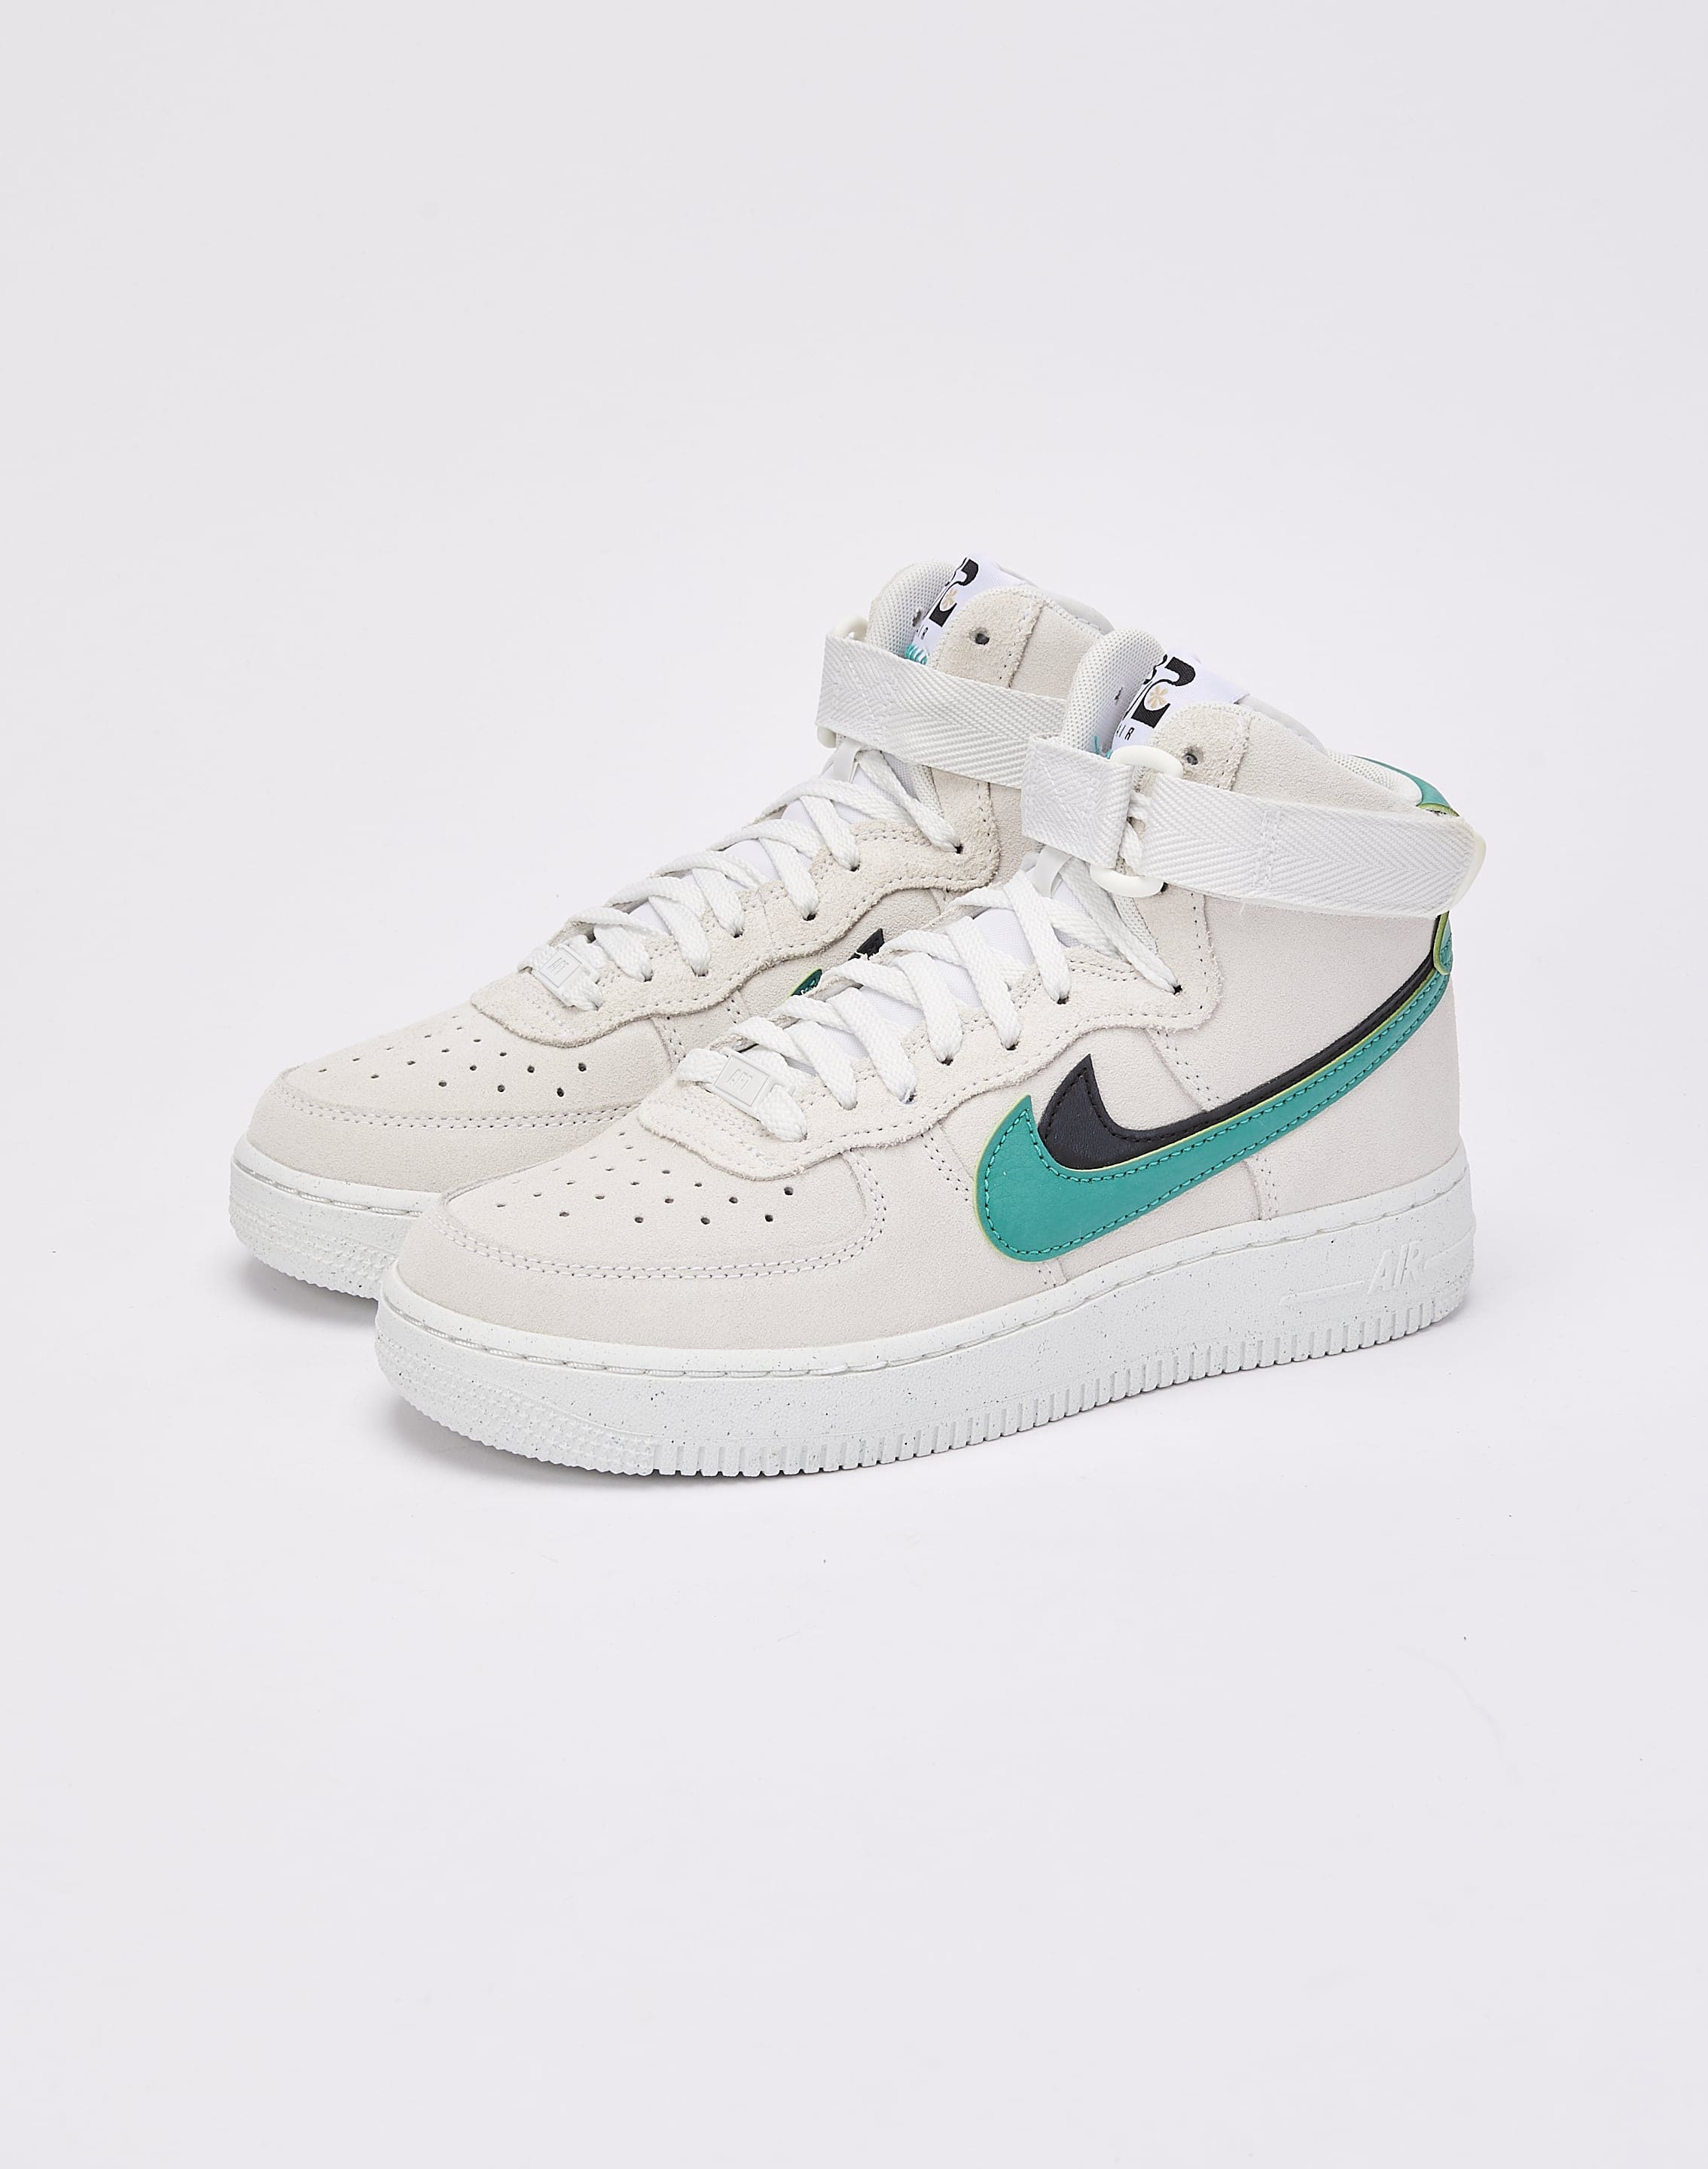 Nike Air Force 1 High 82 DO9460-100 Release Date